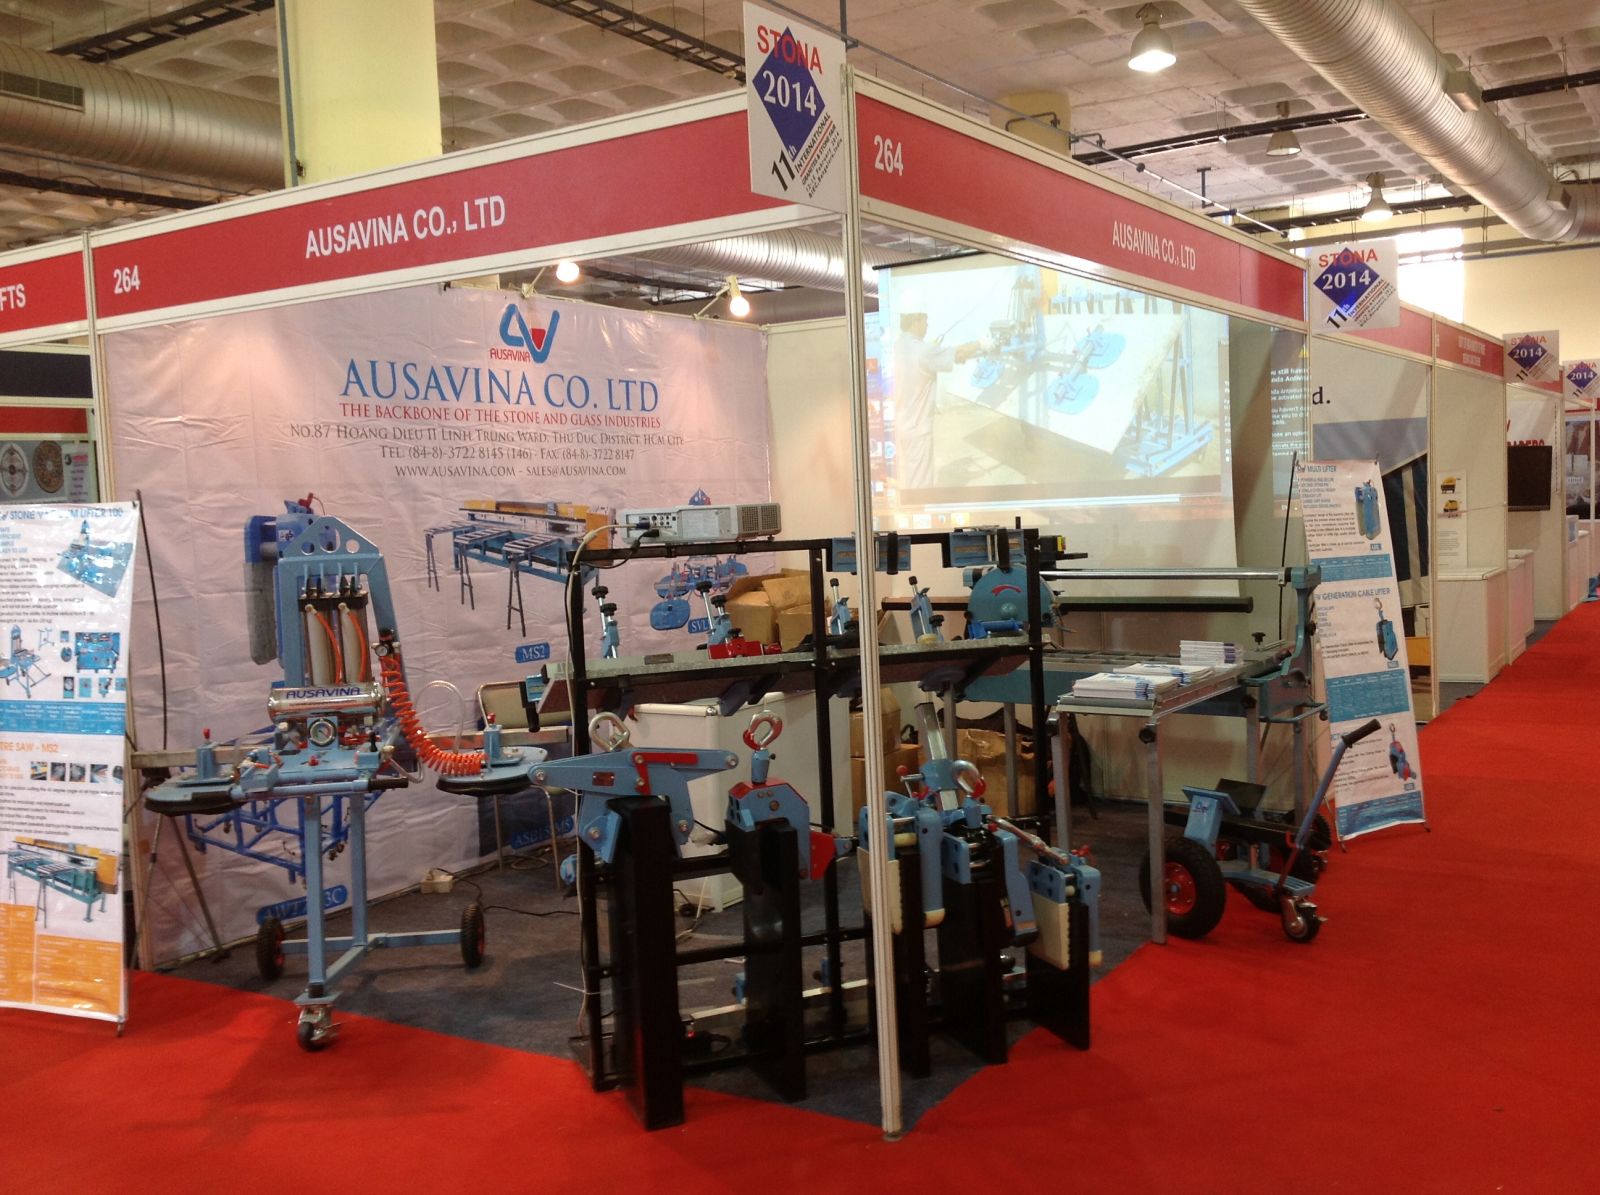 Exhibition booth at Stona 11th, 2014